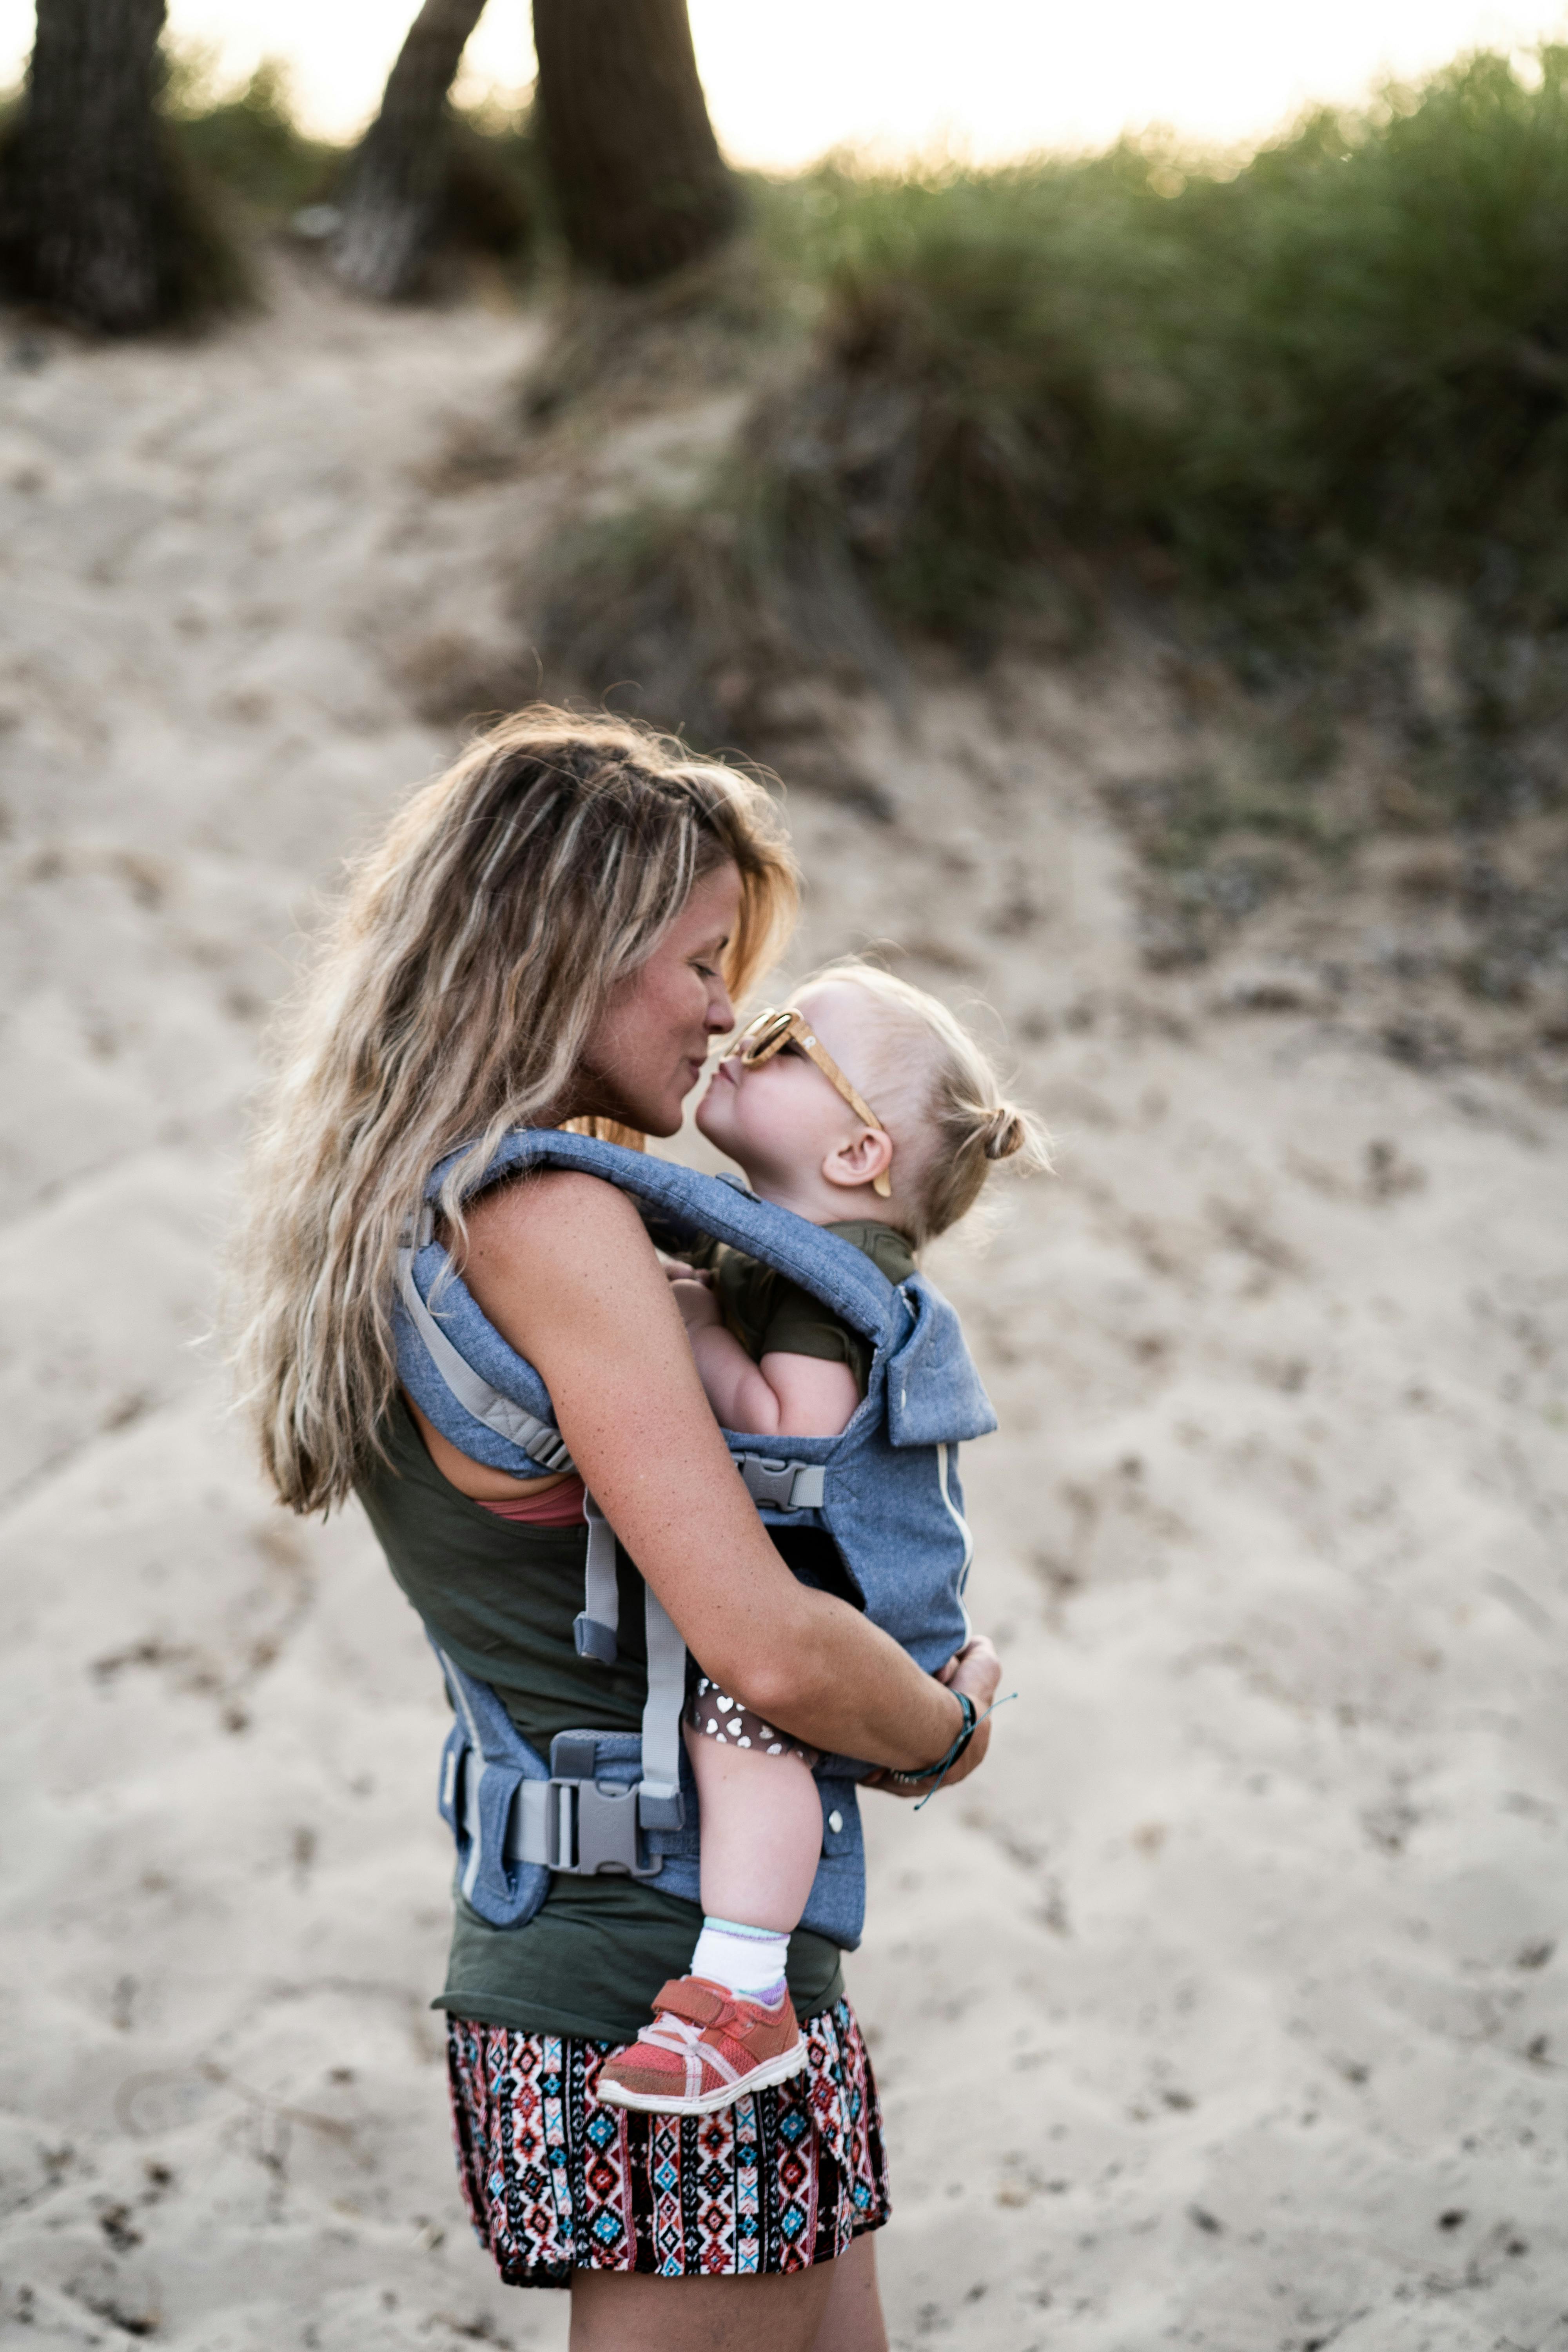 A woman about to share a kiss with a toddler at the beach | Source: Pexels